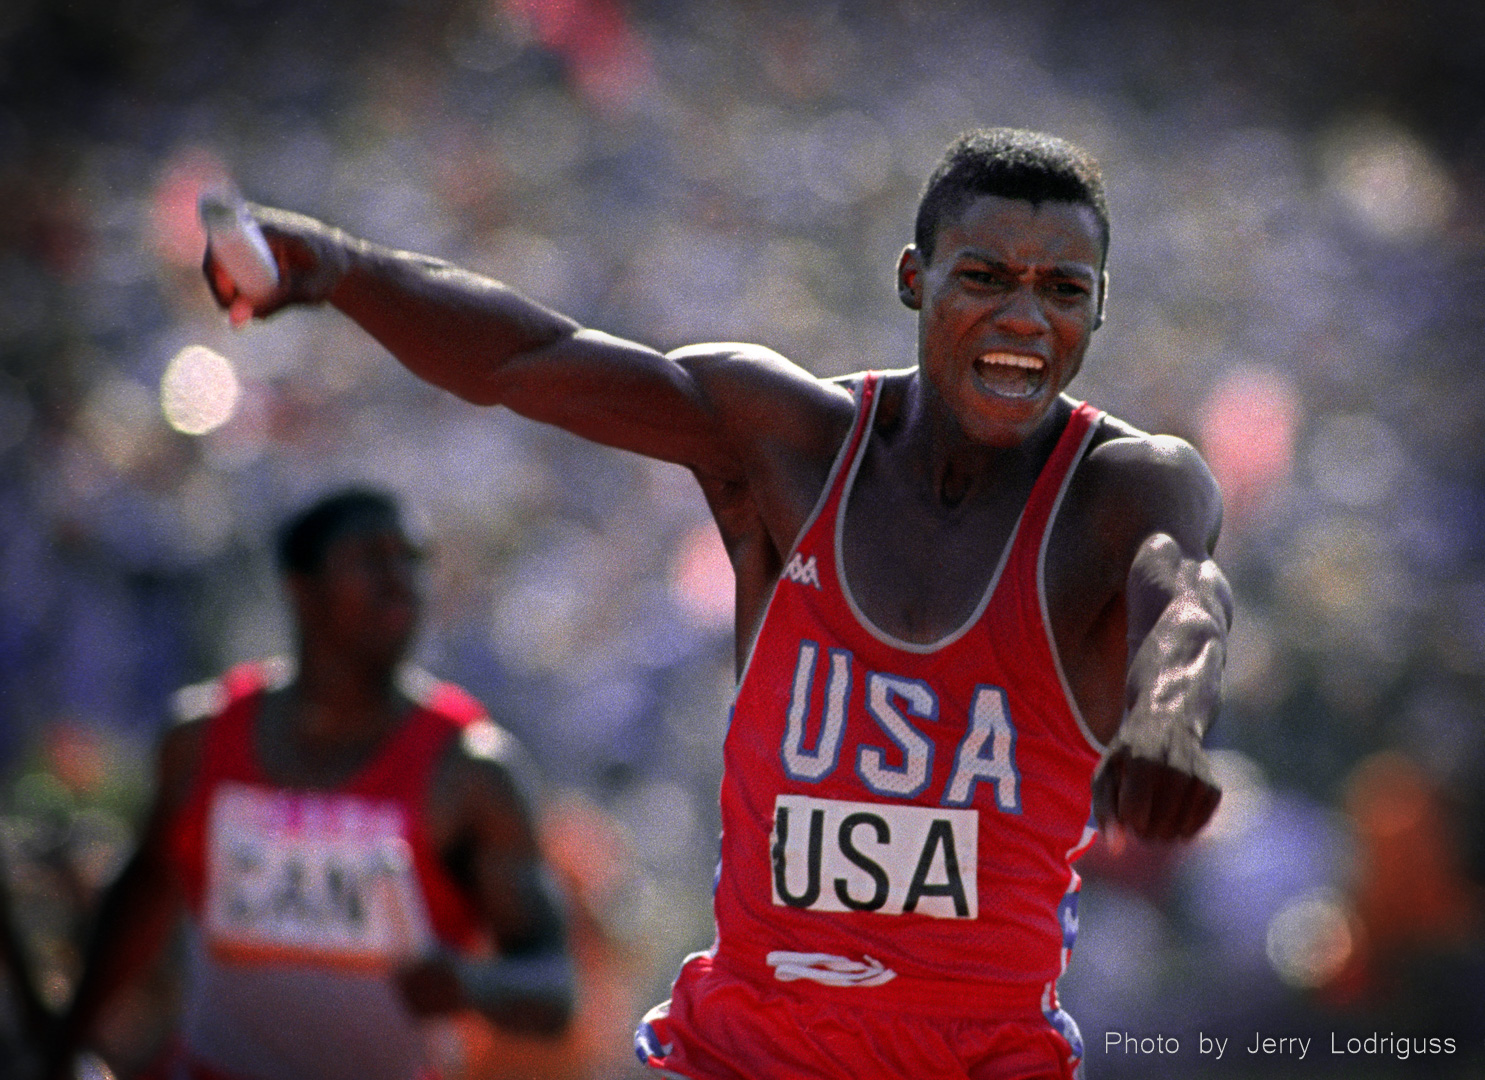 Carl Lewis reacts in joy after seeing a world record time posted on the scoreboard as he crosses the finish line in the men's 400 meter relay. Lewis won his 4th gold medal of the games when he anchored the relay team to a 37.83 clocking.